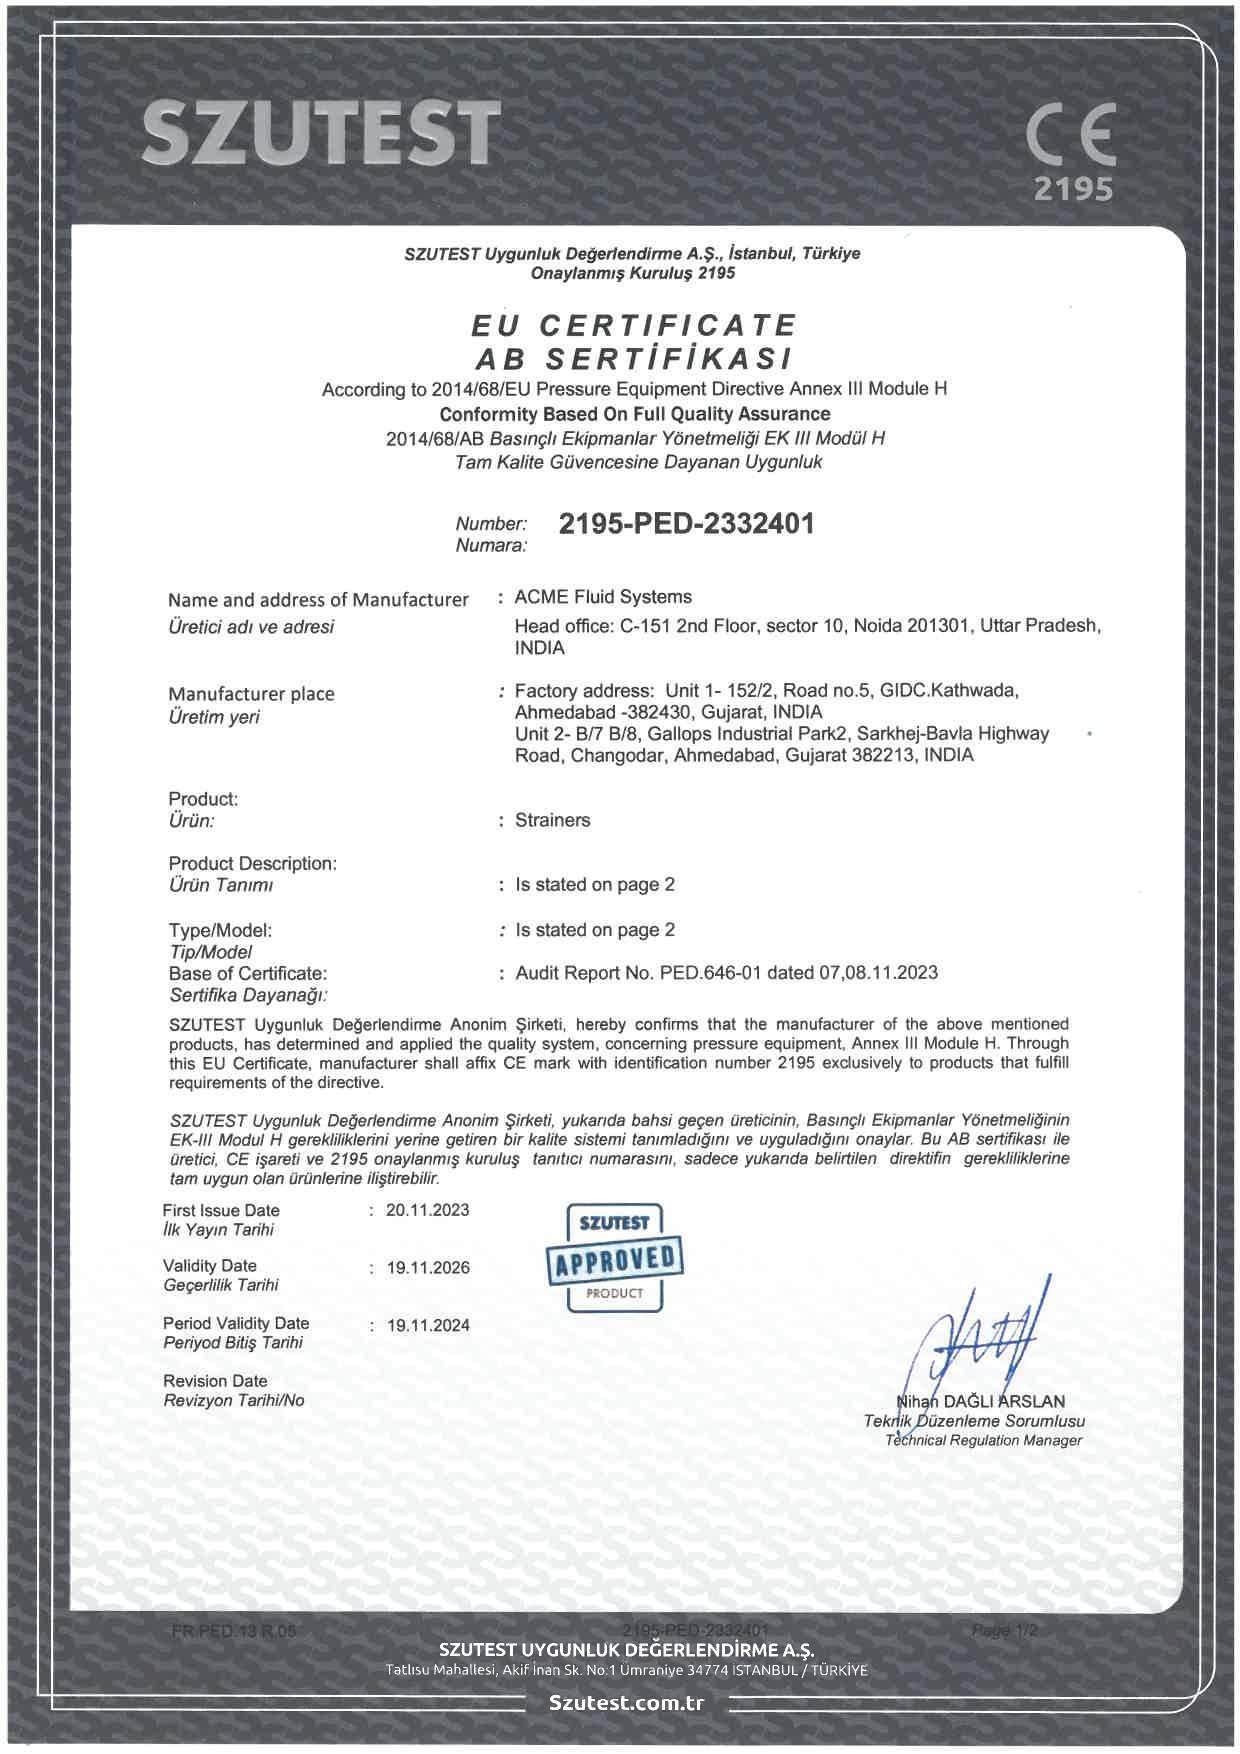 CE Approval Certificate